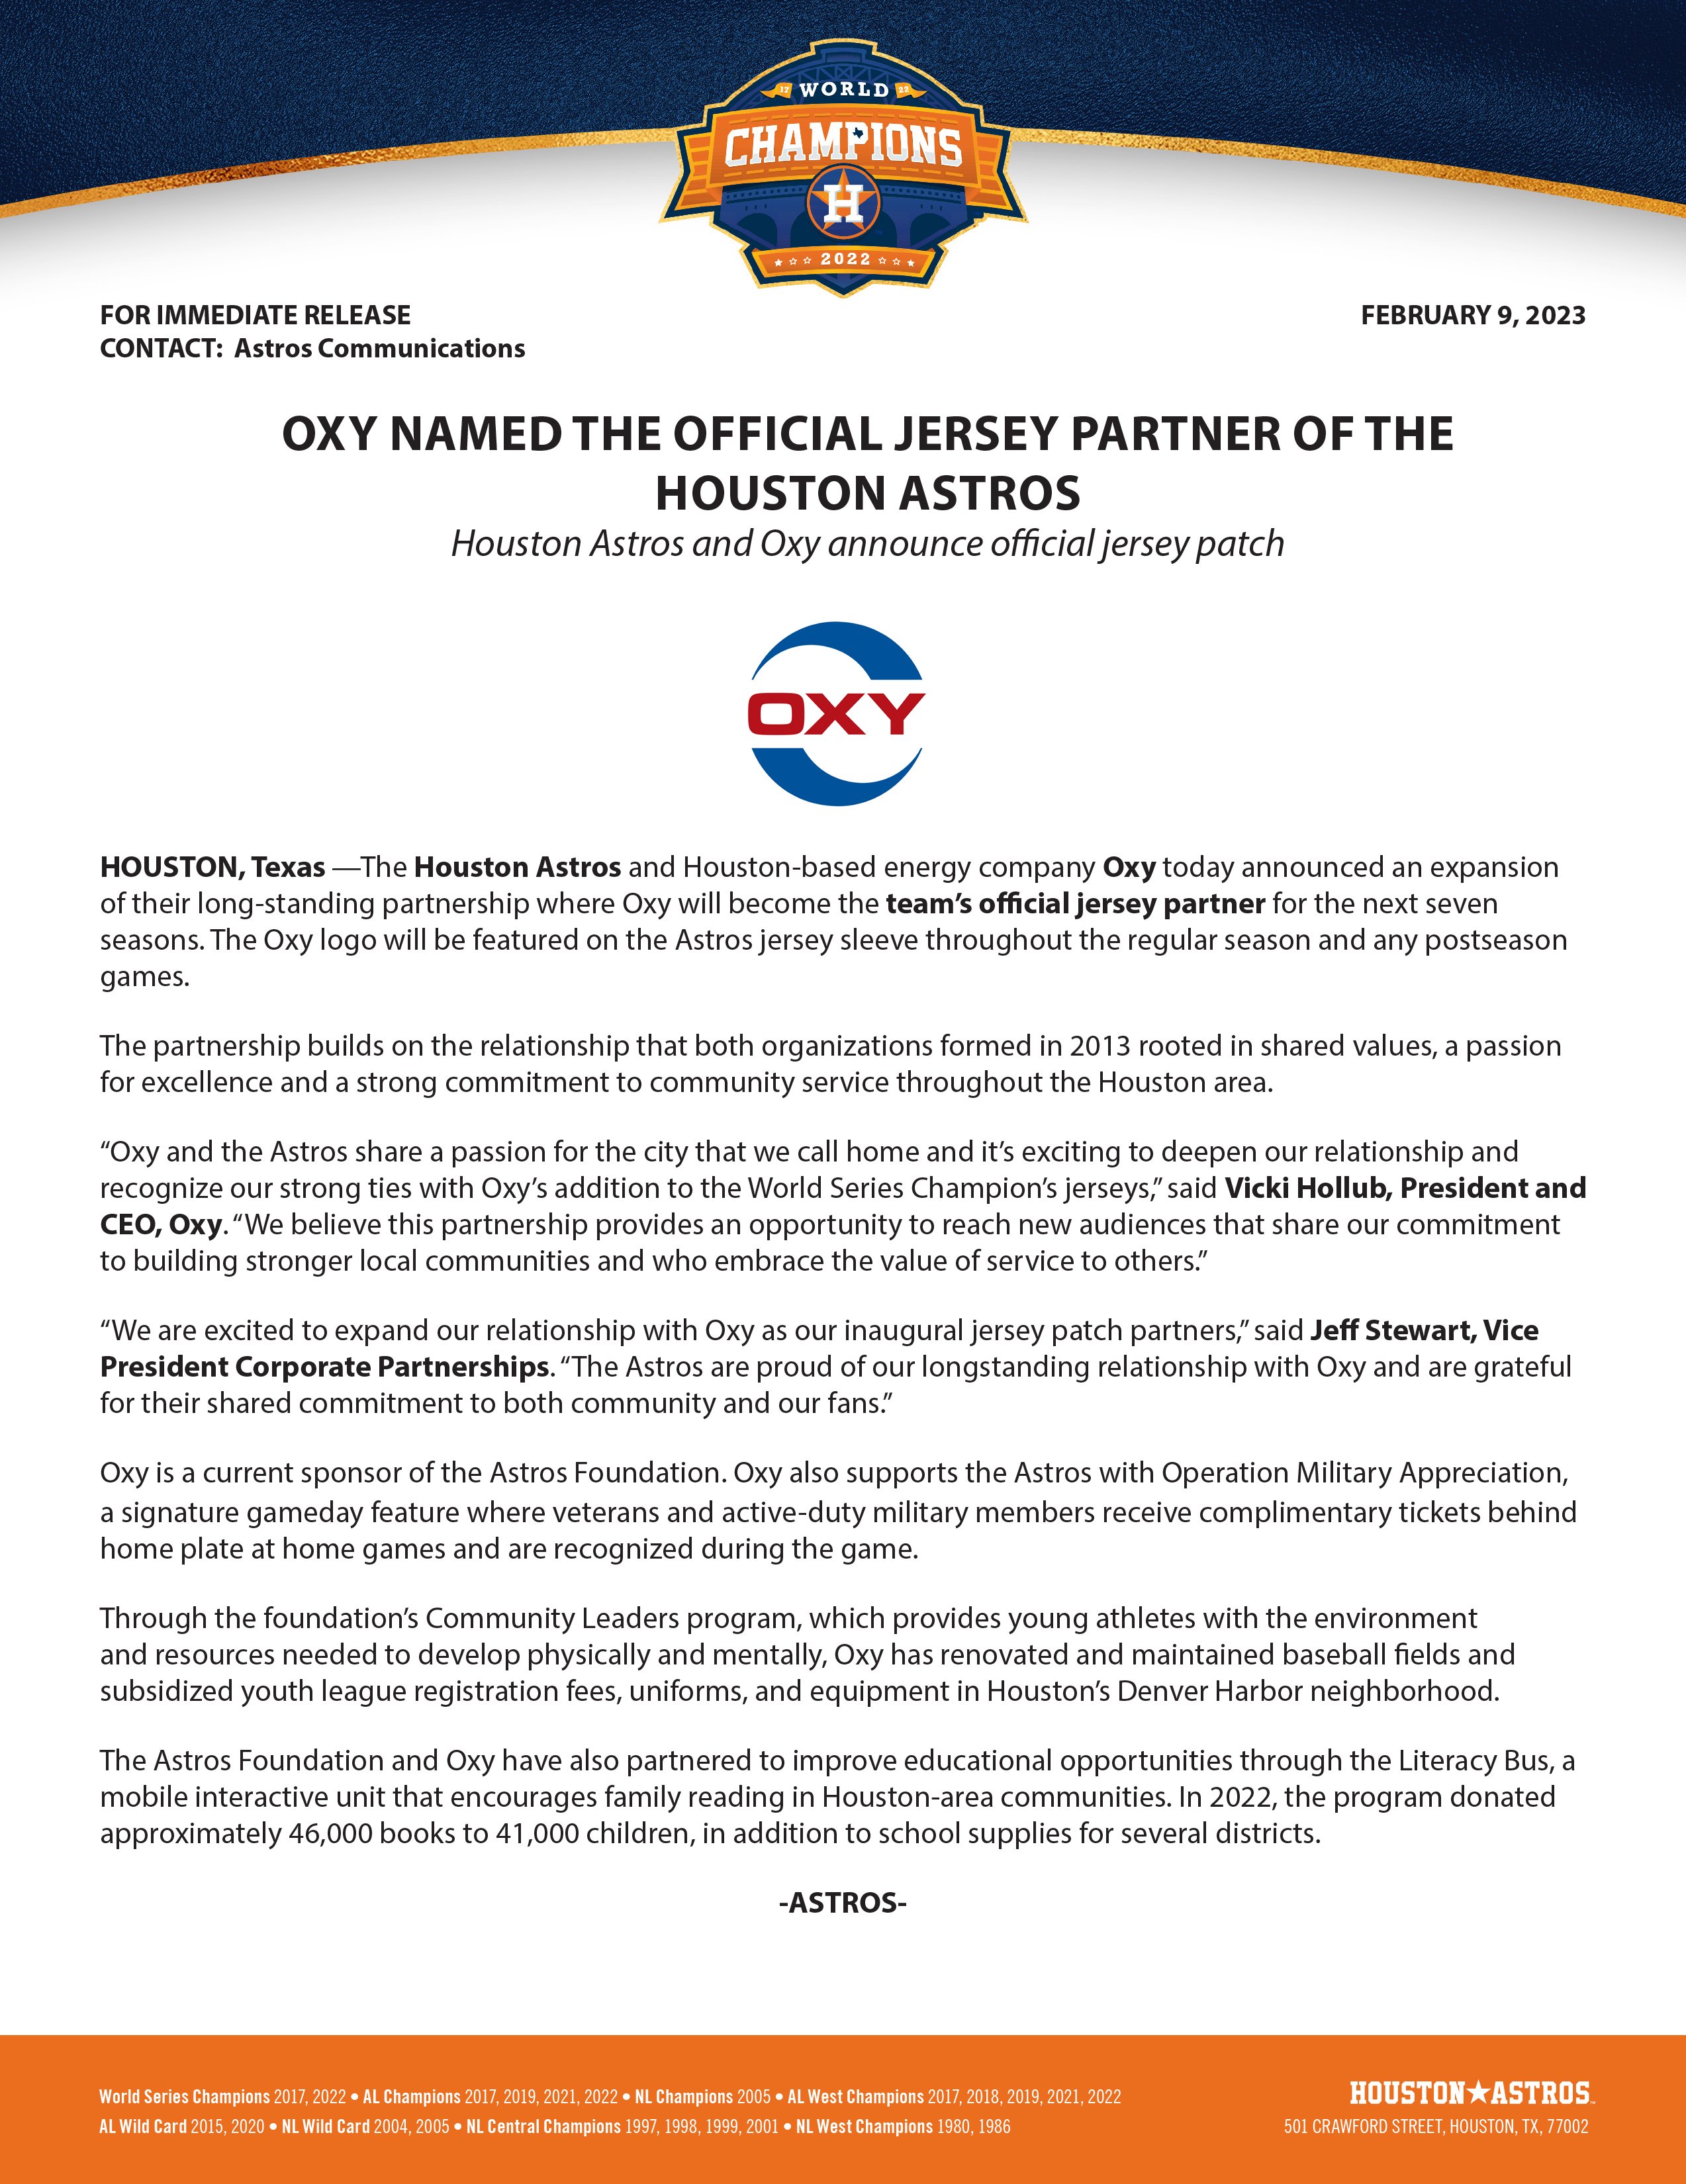 Press release: Oxy Named the Official Jersey Partner of the Houston Astros